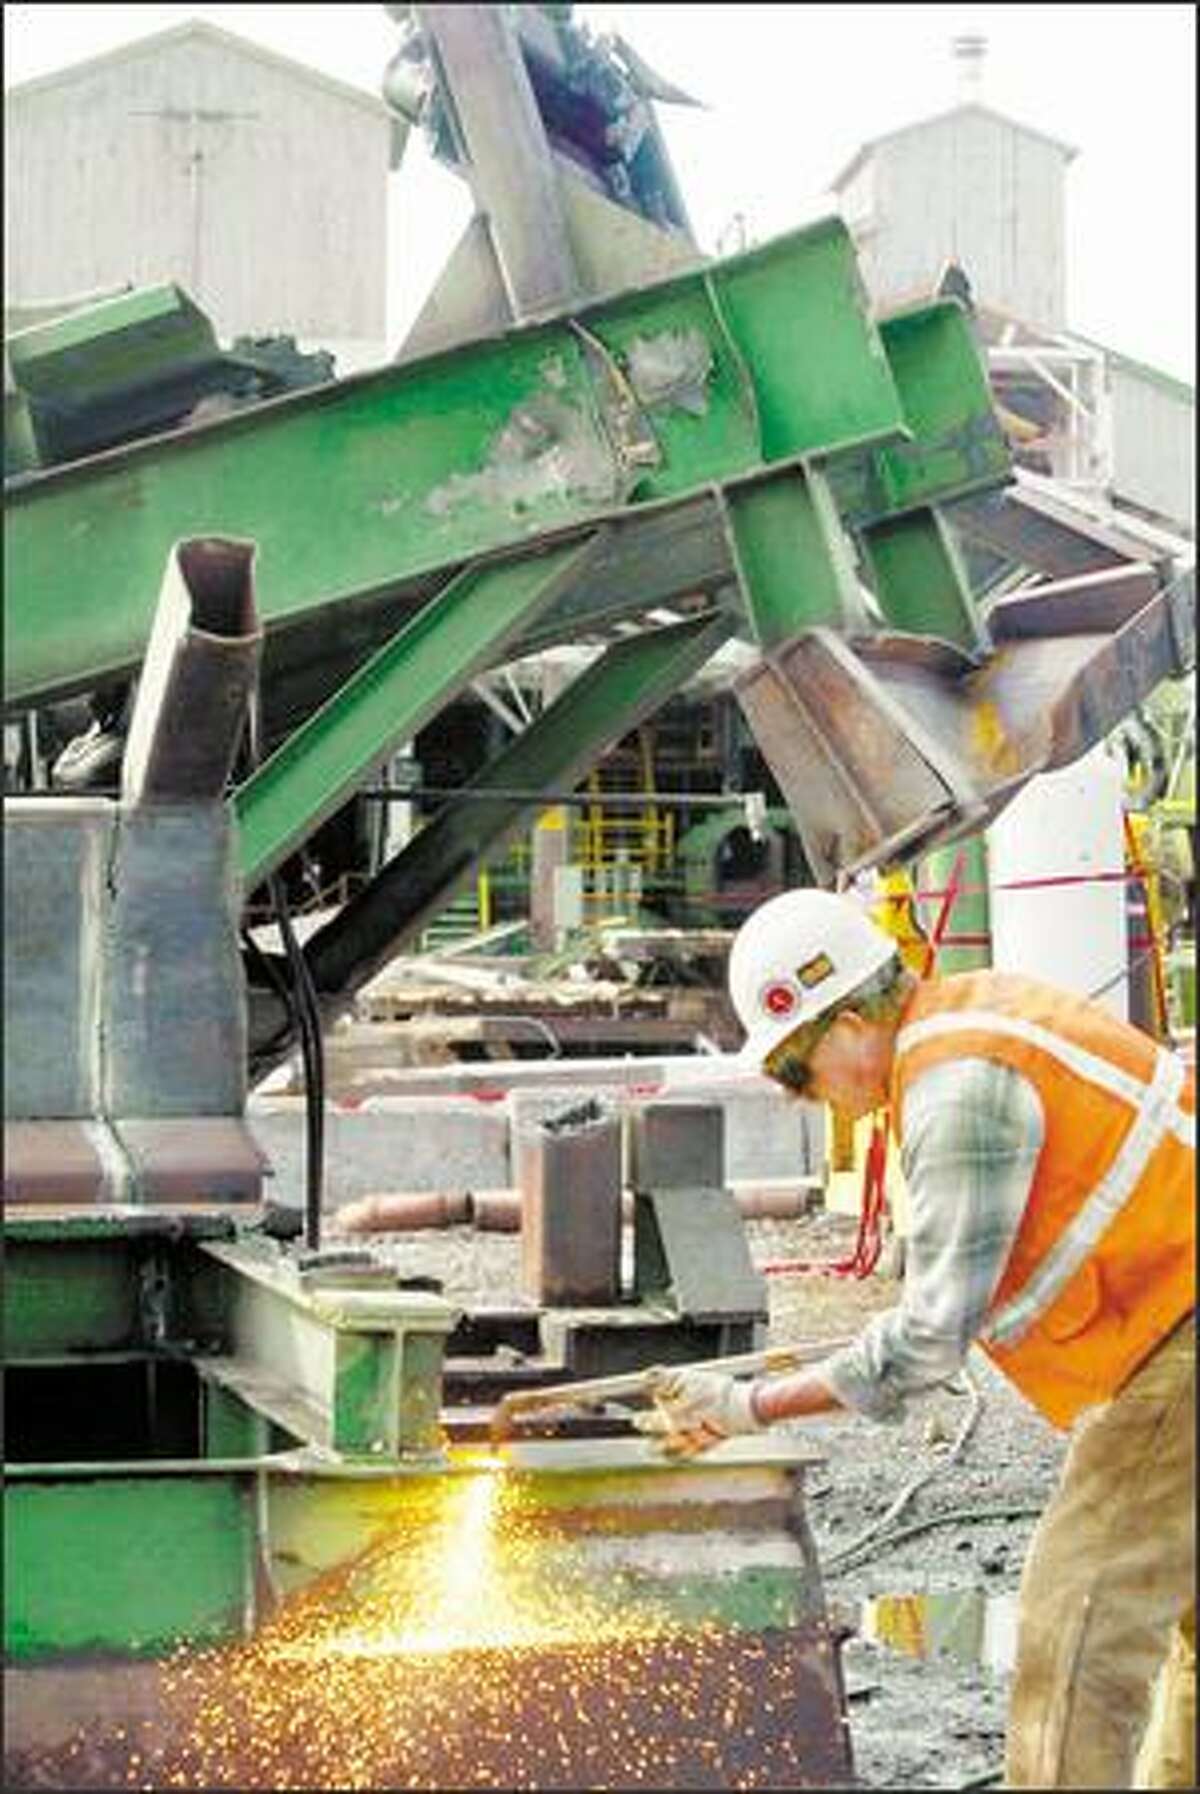 John Schneider with Staton Cos., a demolition firm, cuts up a large steel beam that was removed from the closed Weyerhaeuser mill near Enumclaw. Steel, wood and even concrete will be salvaged and reused.